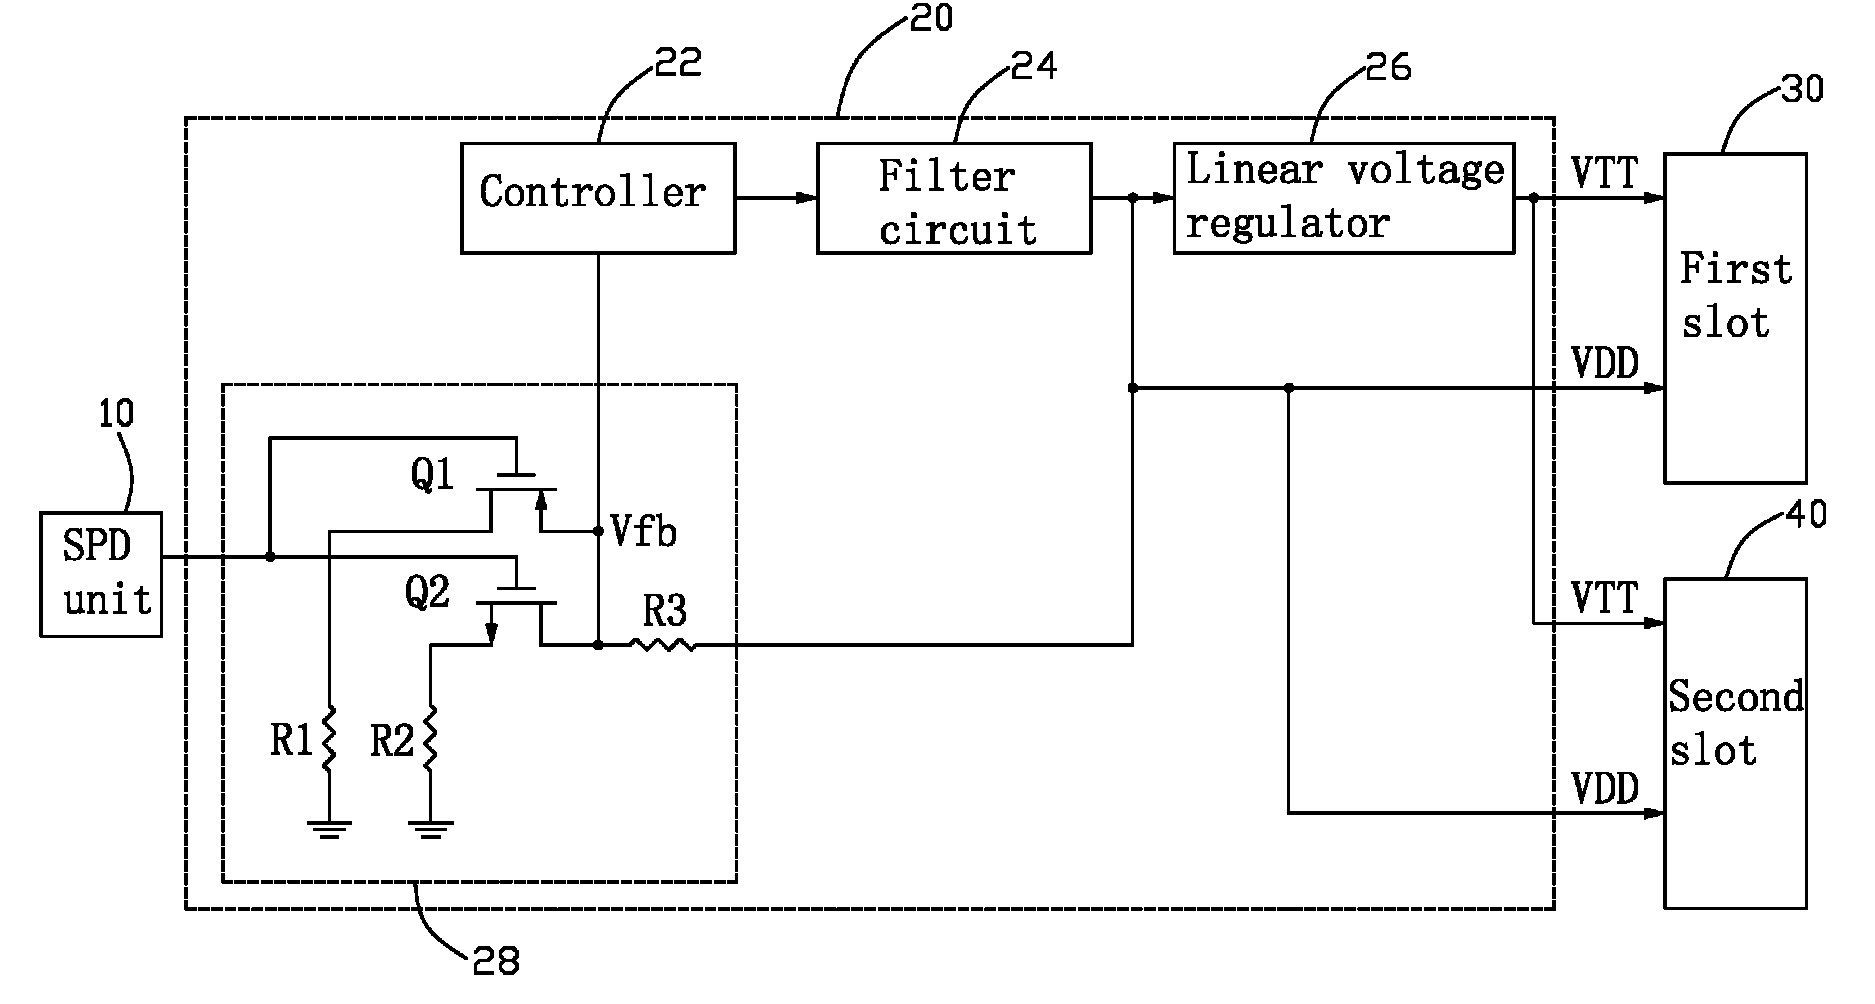 Motherboard with voltage regulator supporting DDR2 memory modules and DDR3 memory modules